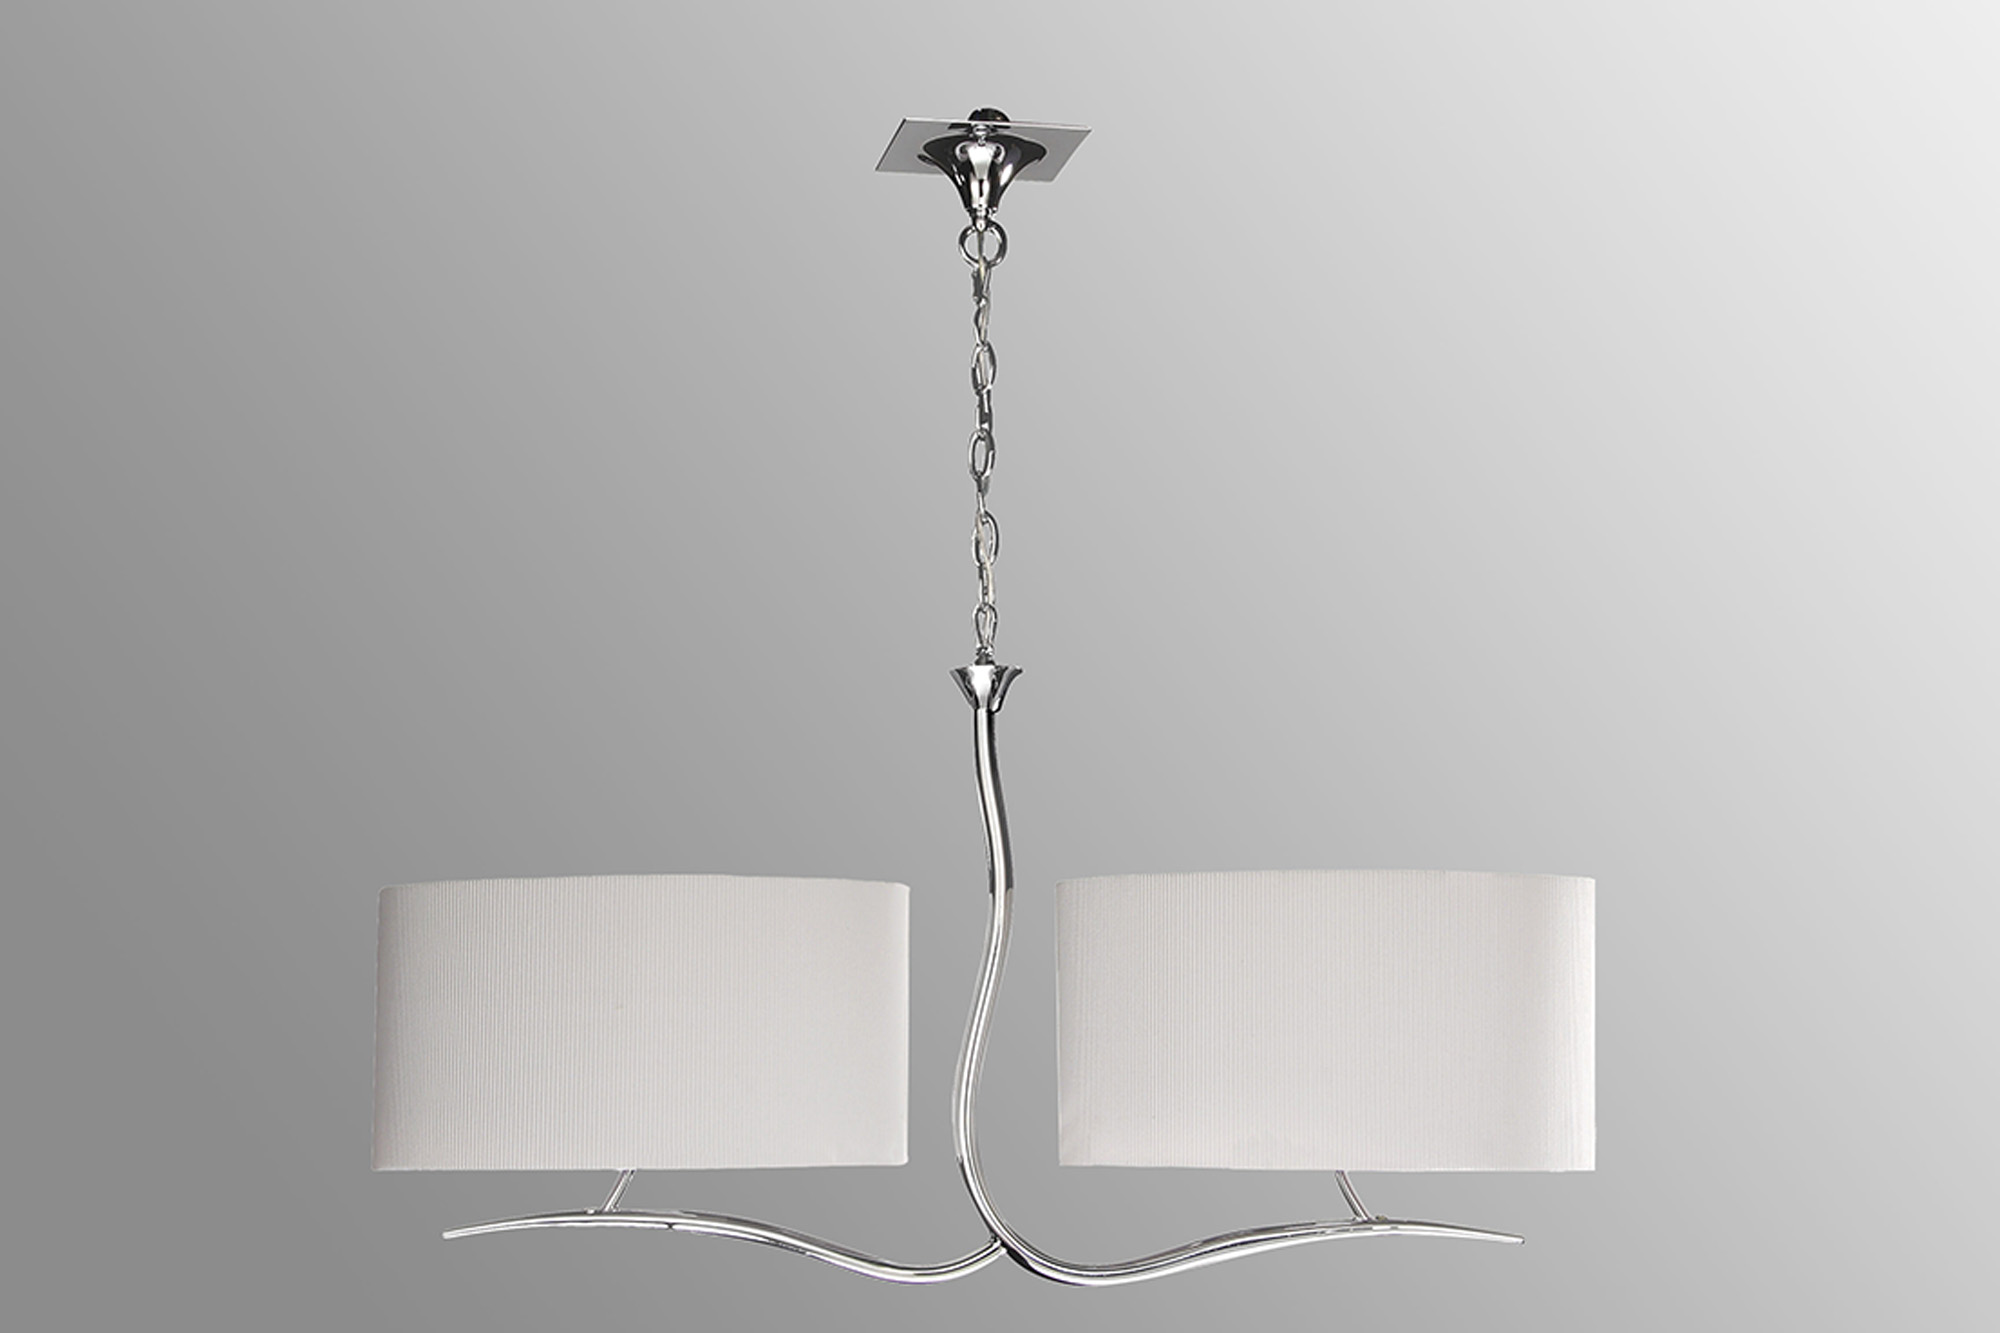 Eve Polished Chrome-Spain White Ceiling Lights Mantra Multi Arm Fittings